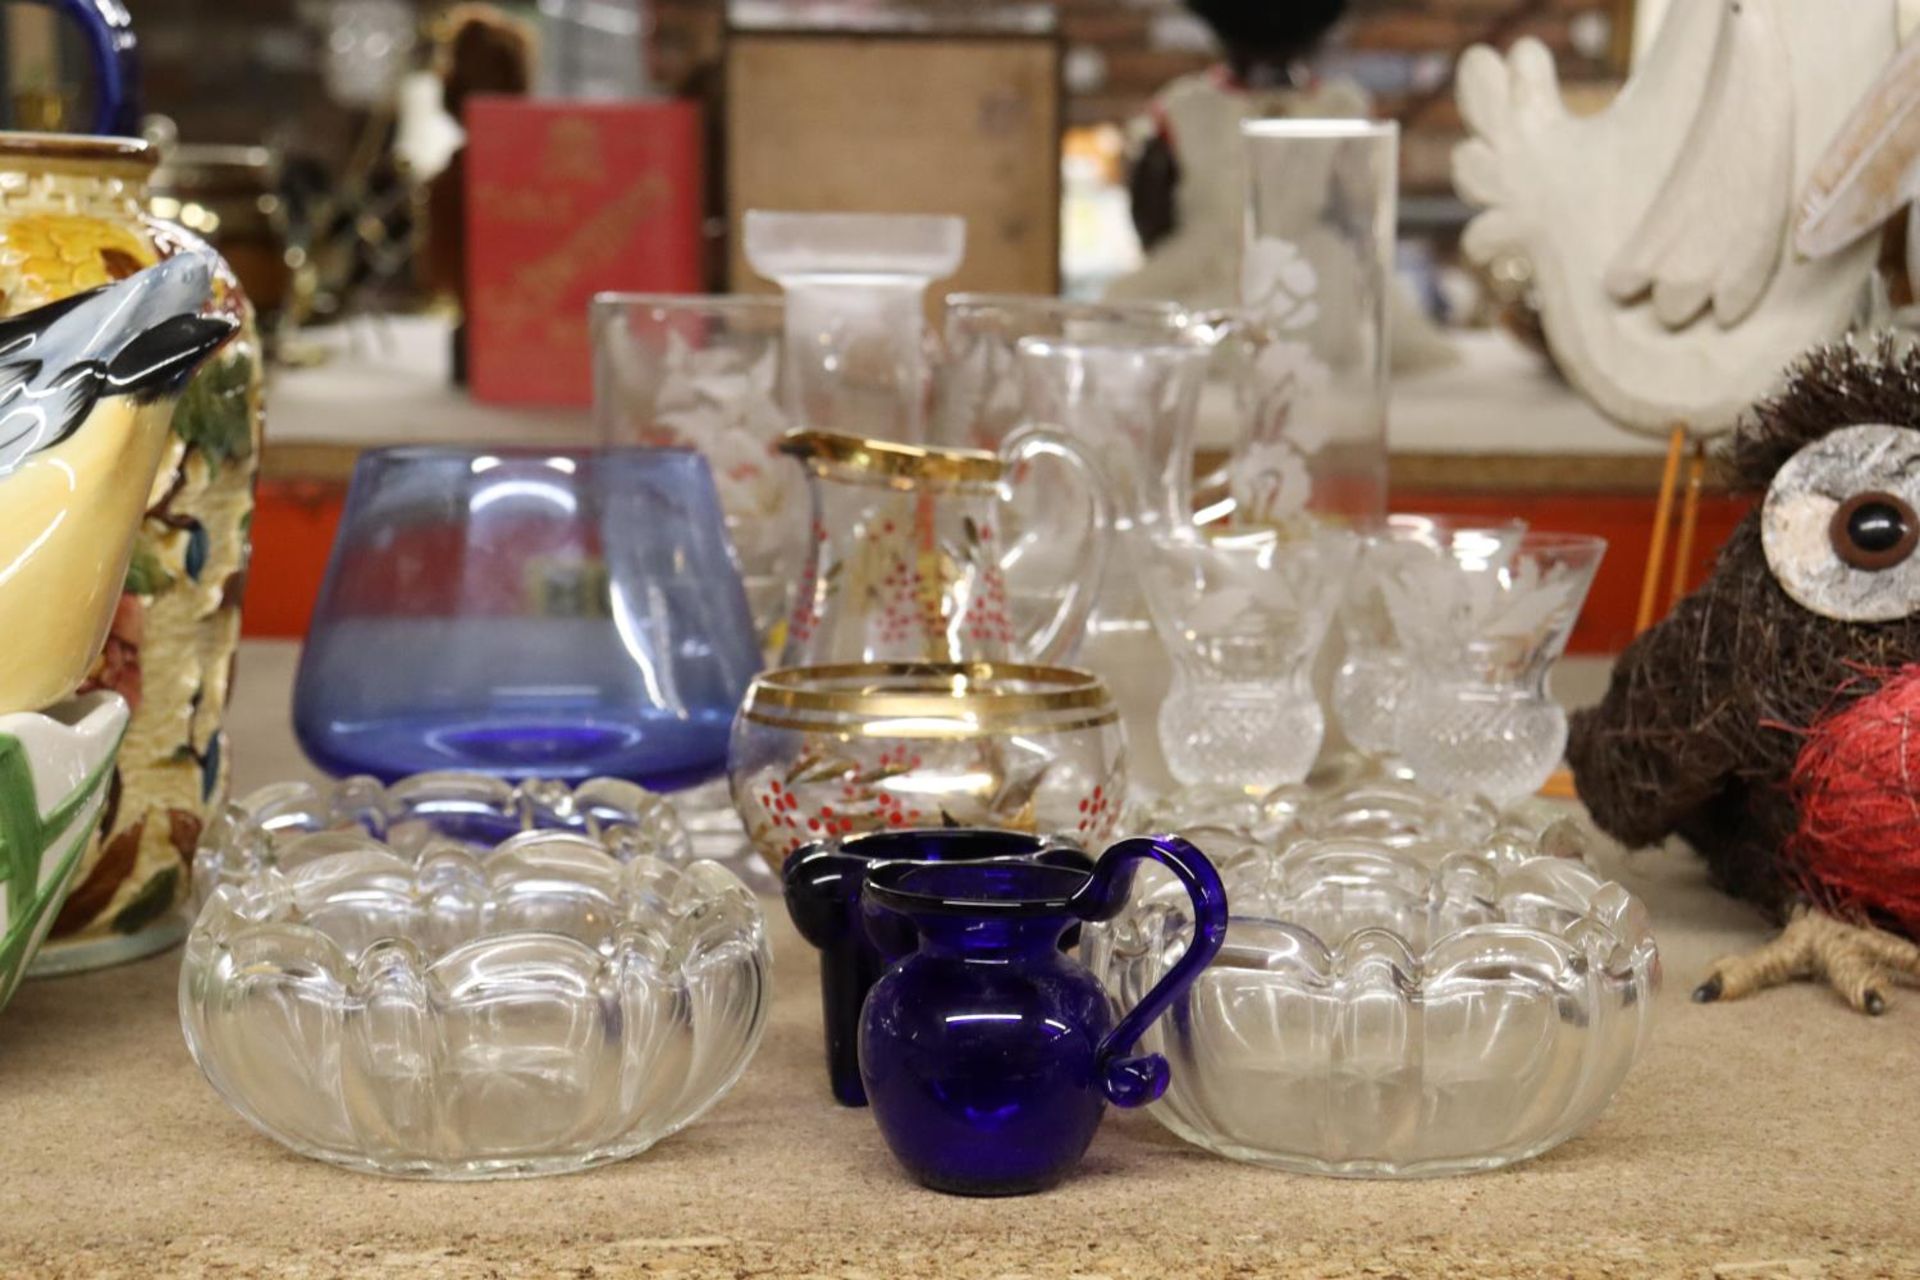 A QUANTITY OF GLASSWARE TO INCLUDE DRINKING GLASSES, BOWLS, JUGS, ETC.,